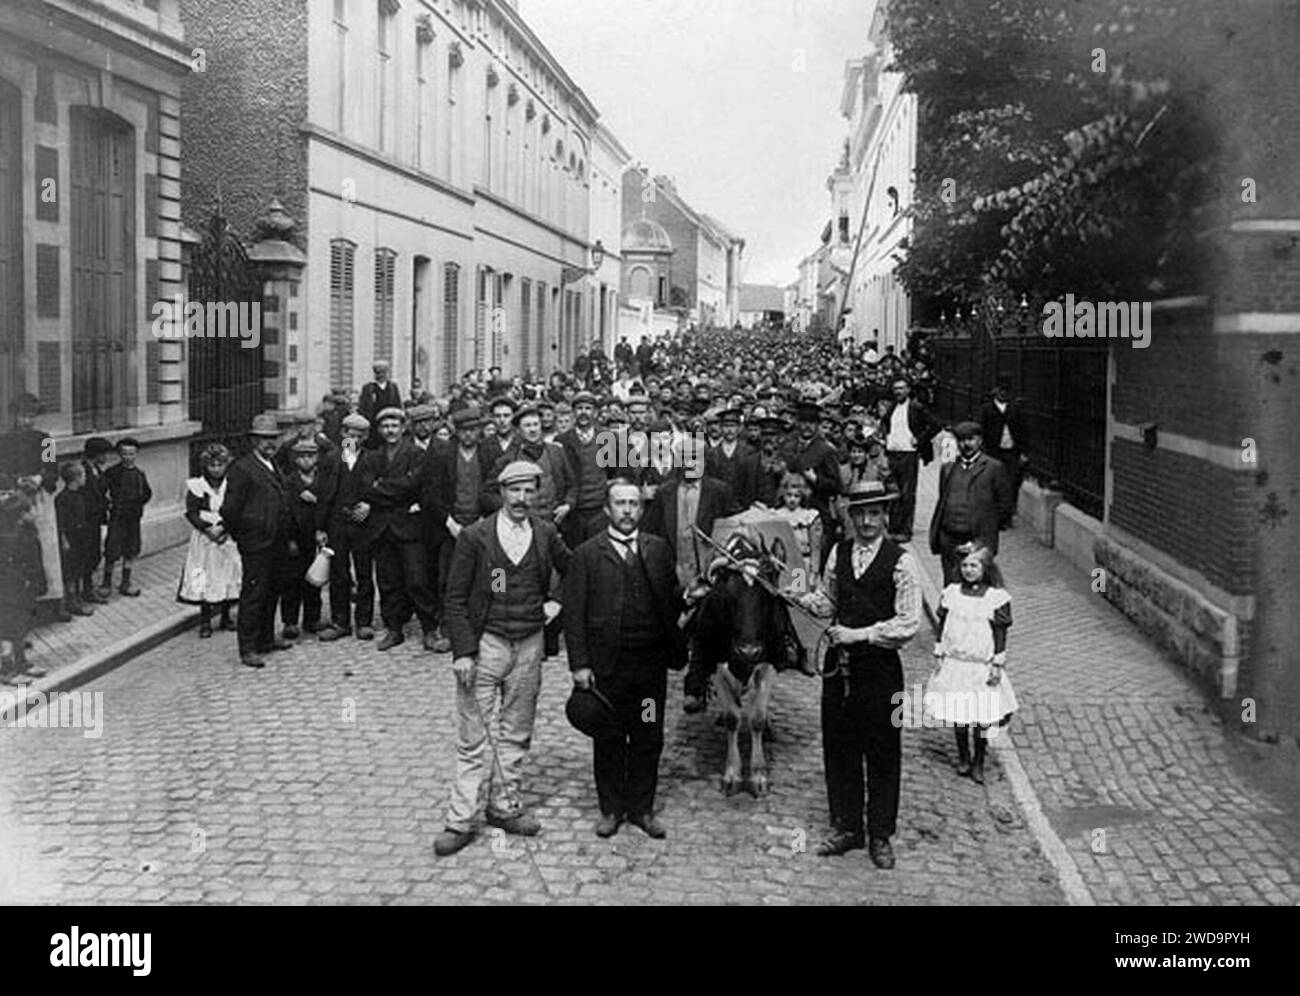 1907 strike at Beernaerts, Wetteren - workers march through Wetteren with a cow given by the Aalst socialists. Stock Photo